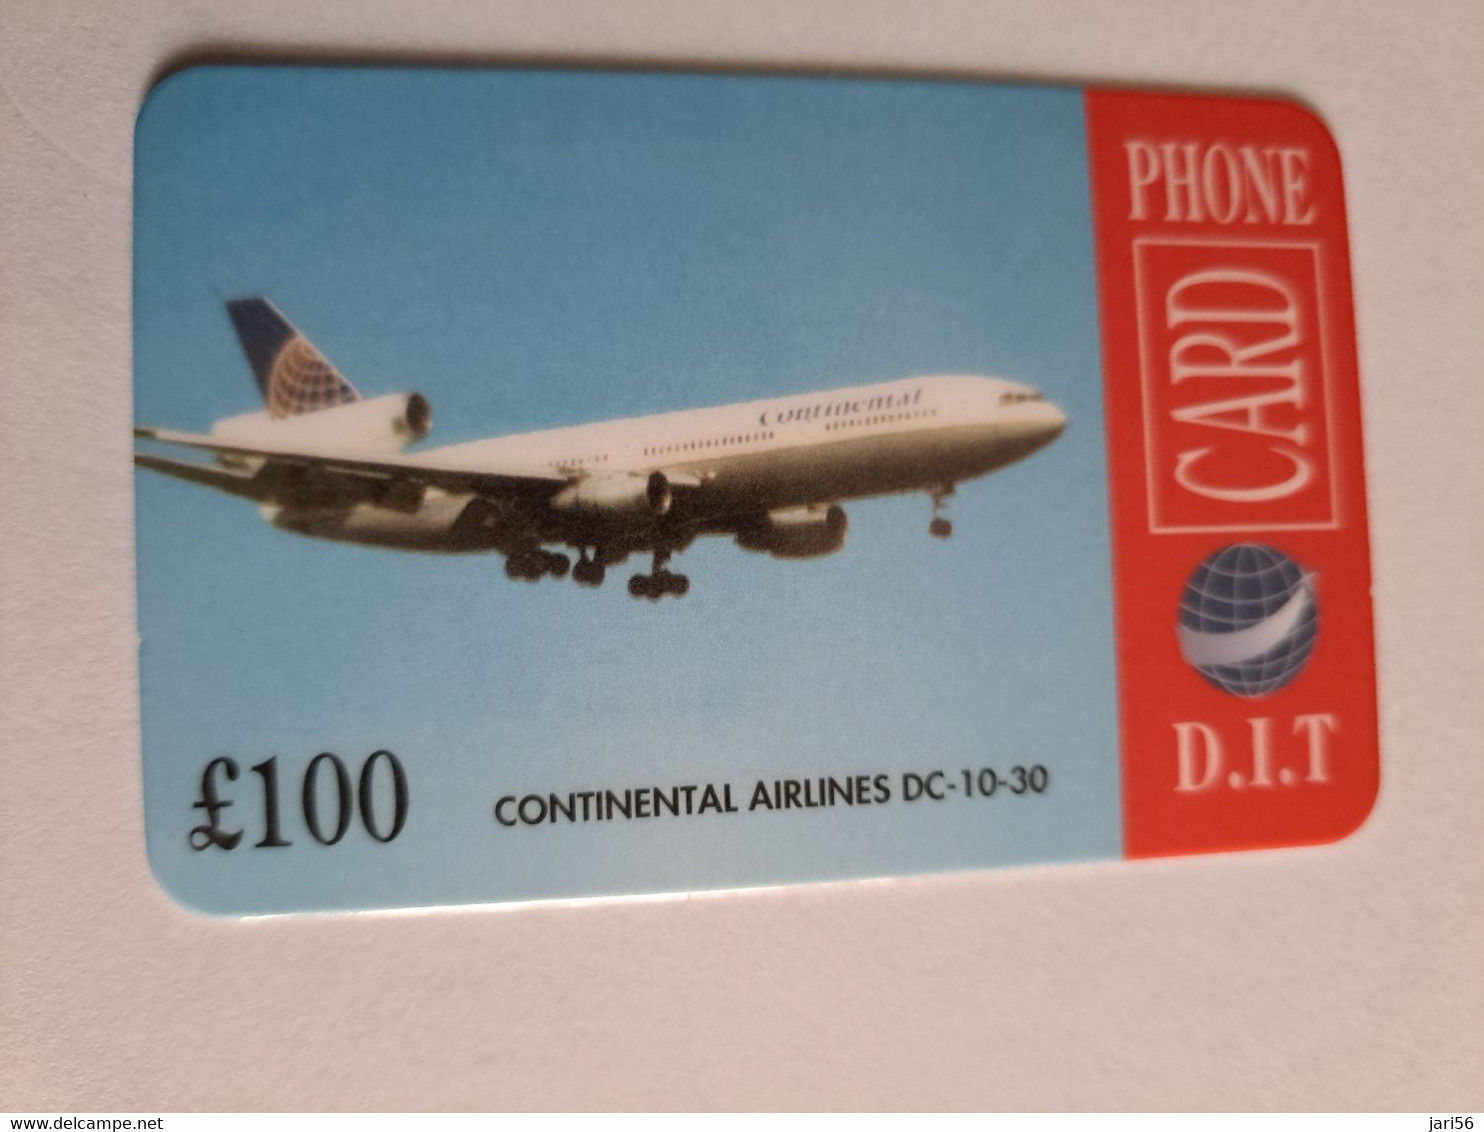 GREAT BRITAIN   100 POUND   / CONTINENTAL AIRLINES DC 10-30   DIT PHONECARD    PREPAID CARD      **12903** - Verzamelingen